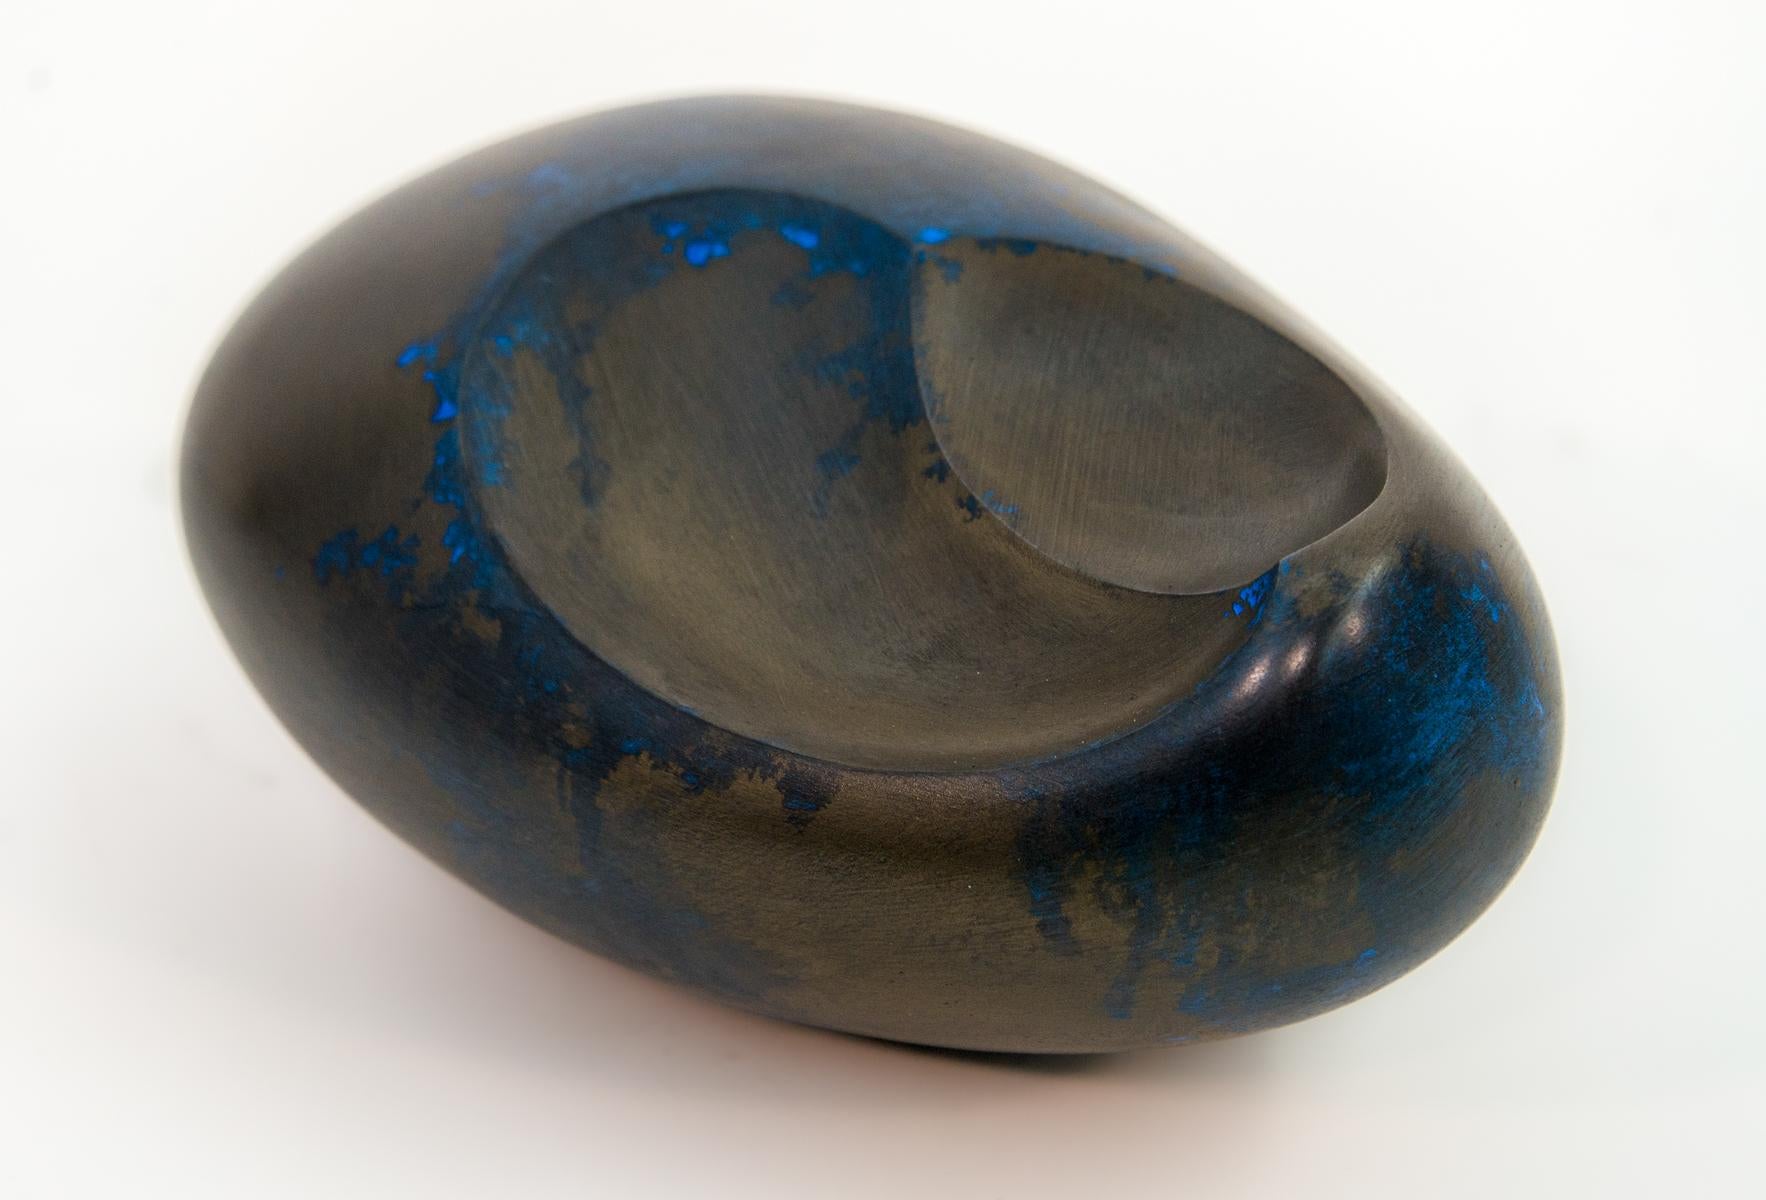 The undulating gentle curves of this sculpture by artist Jana Osterman emulate organic egg shaped forms found in nature. Created out of gypsum, polymer and bronze, the finish is patinated with acid which gives the piece a beautiful deep blue